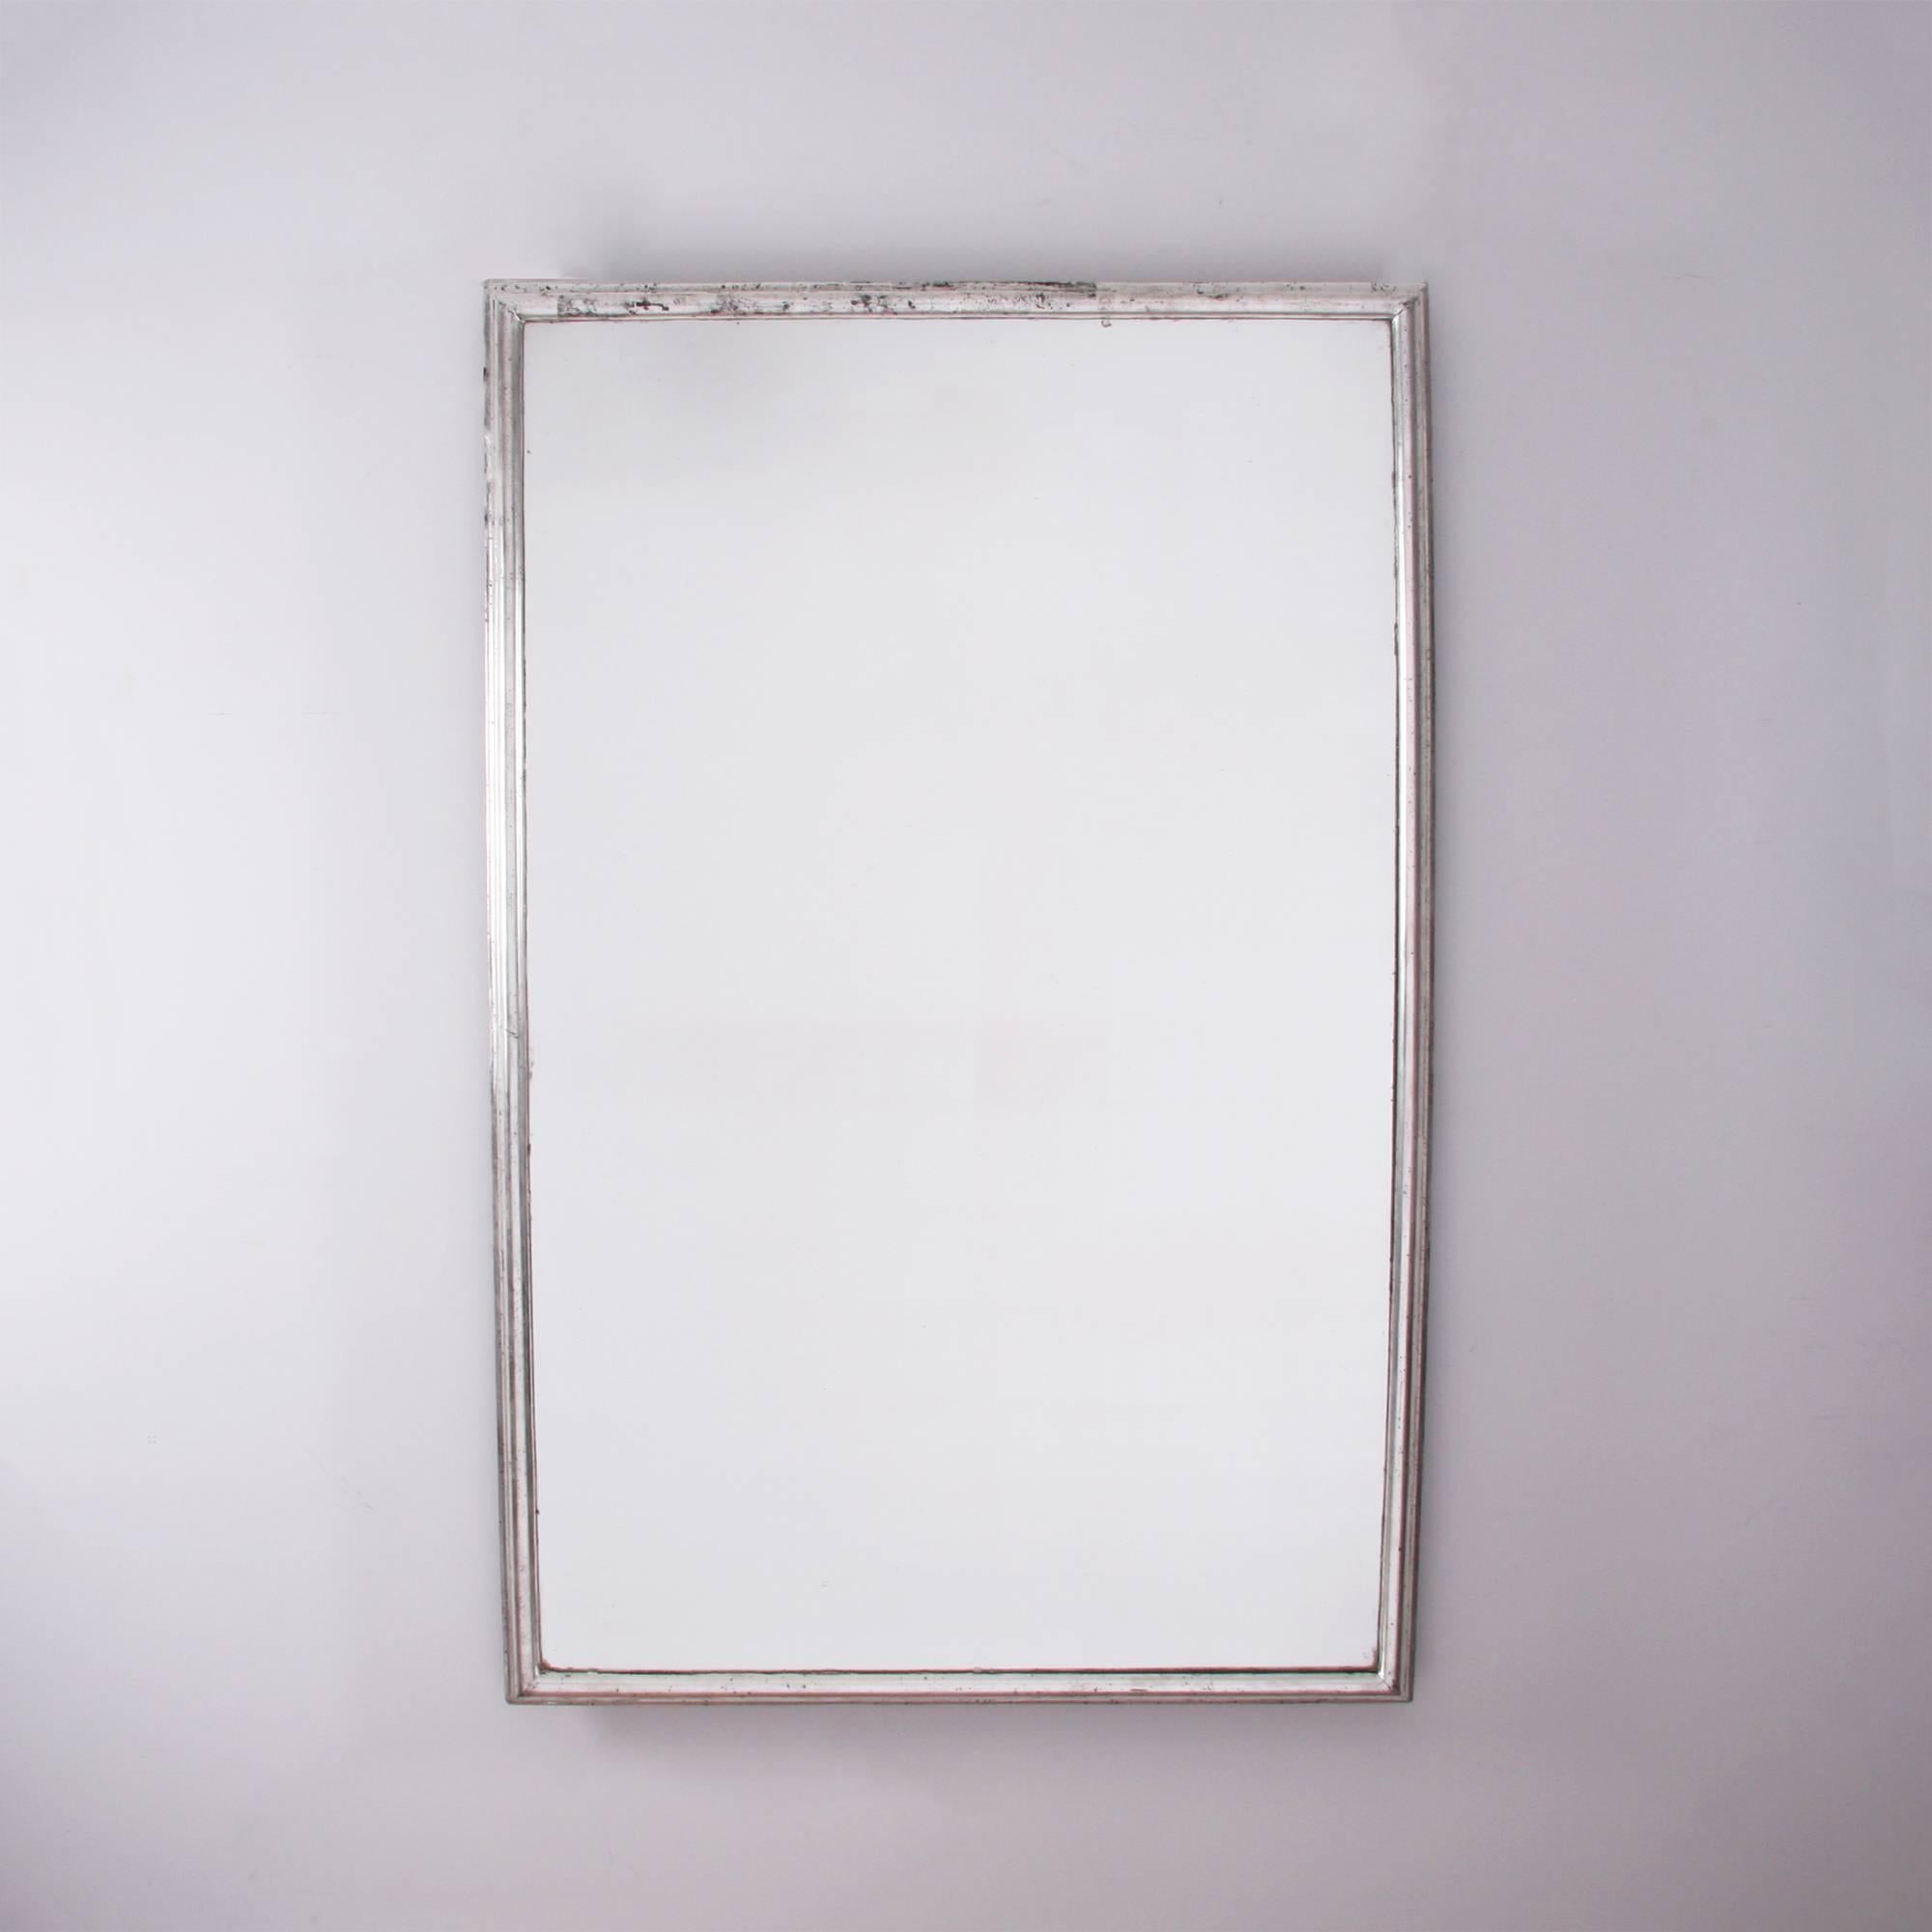 A stunning and elegant silver leaf mirror with a simple bistro style frame. The outside edge of the frame is painted black. Original plate with minor foxing.